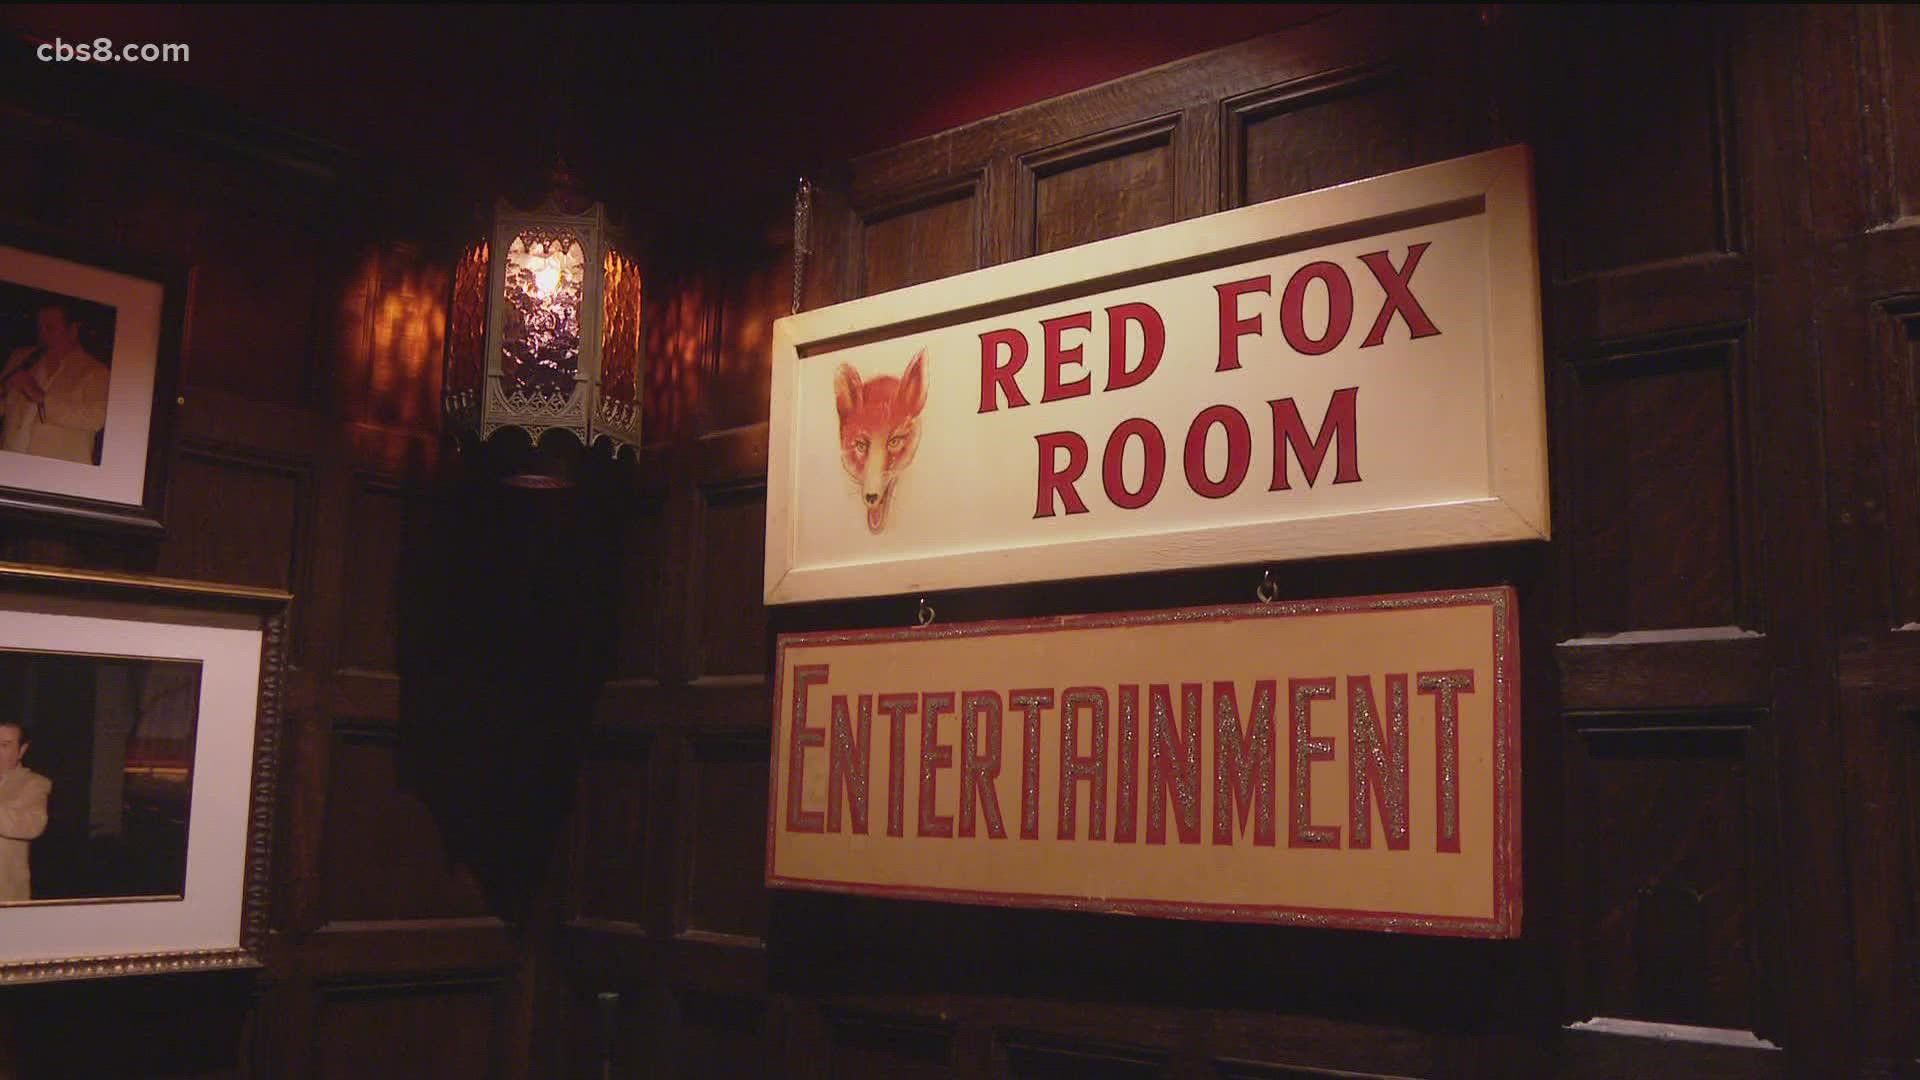 It was back in March 2020 when The Red Fox Room had to close their doors after being open for nearly 60 years.